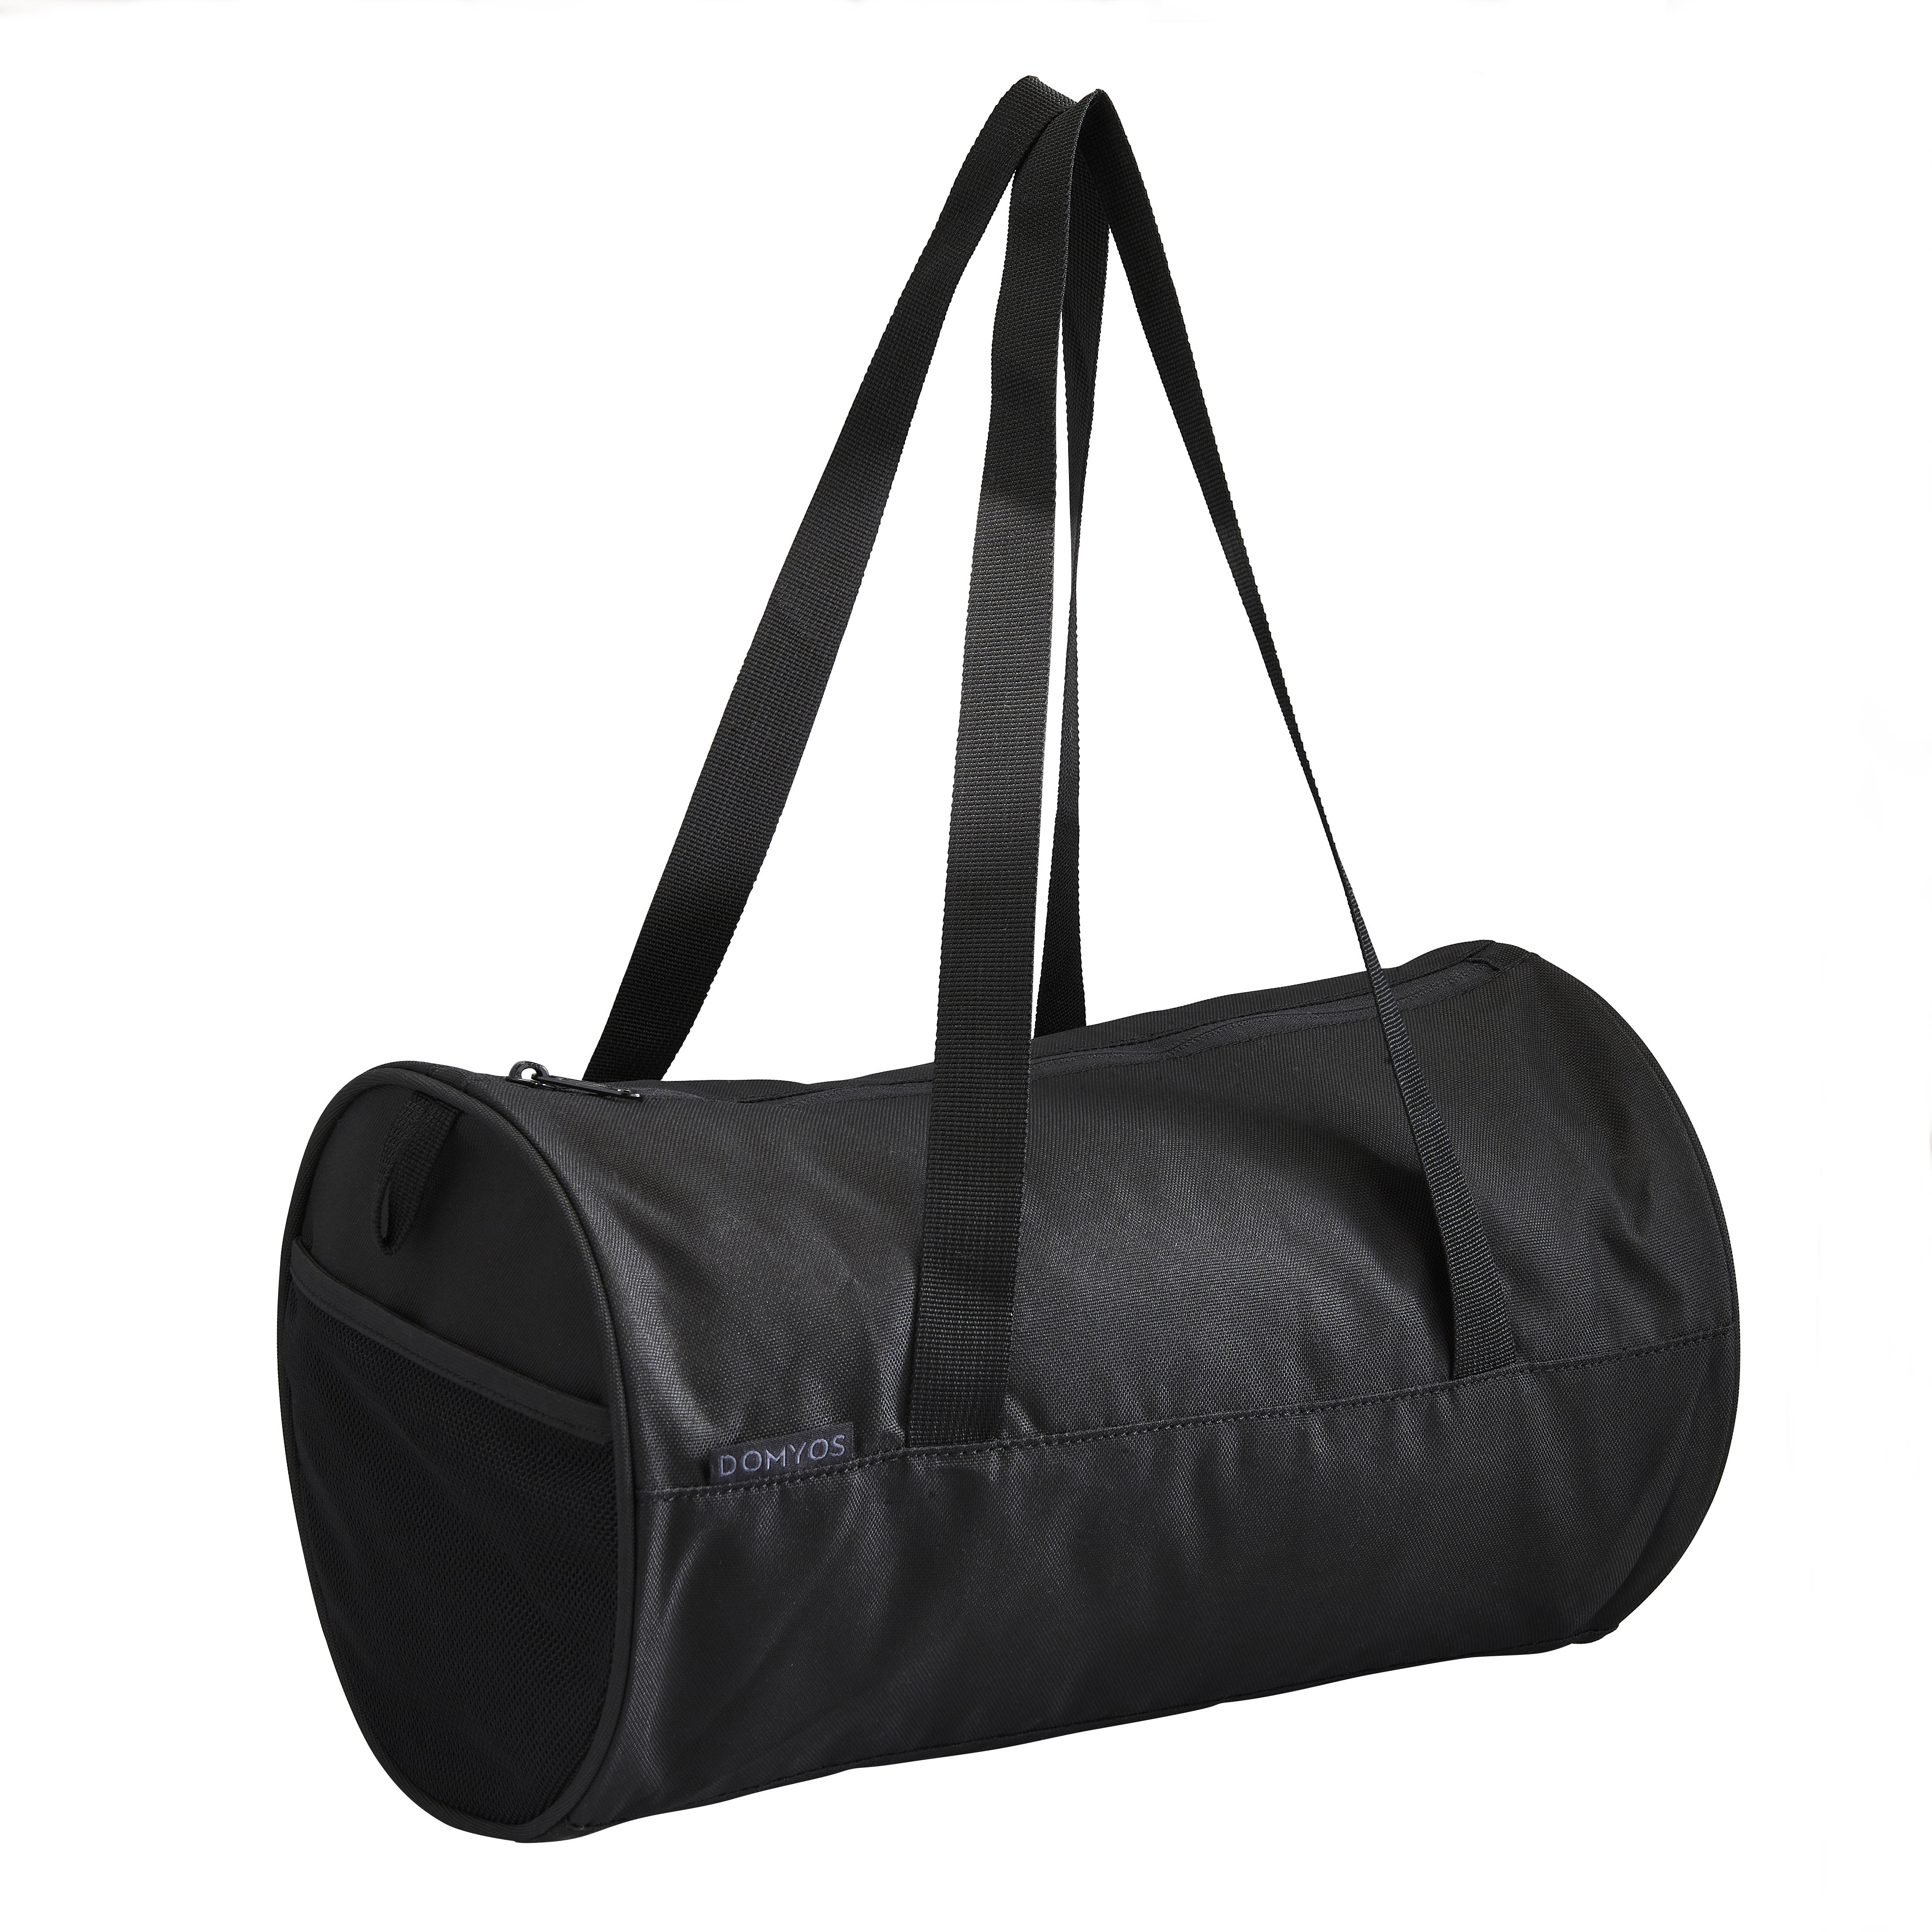 Black Duffle Bag Duffle Bag for Sale by SeanGreen14  Redbubble